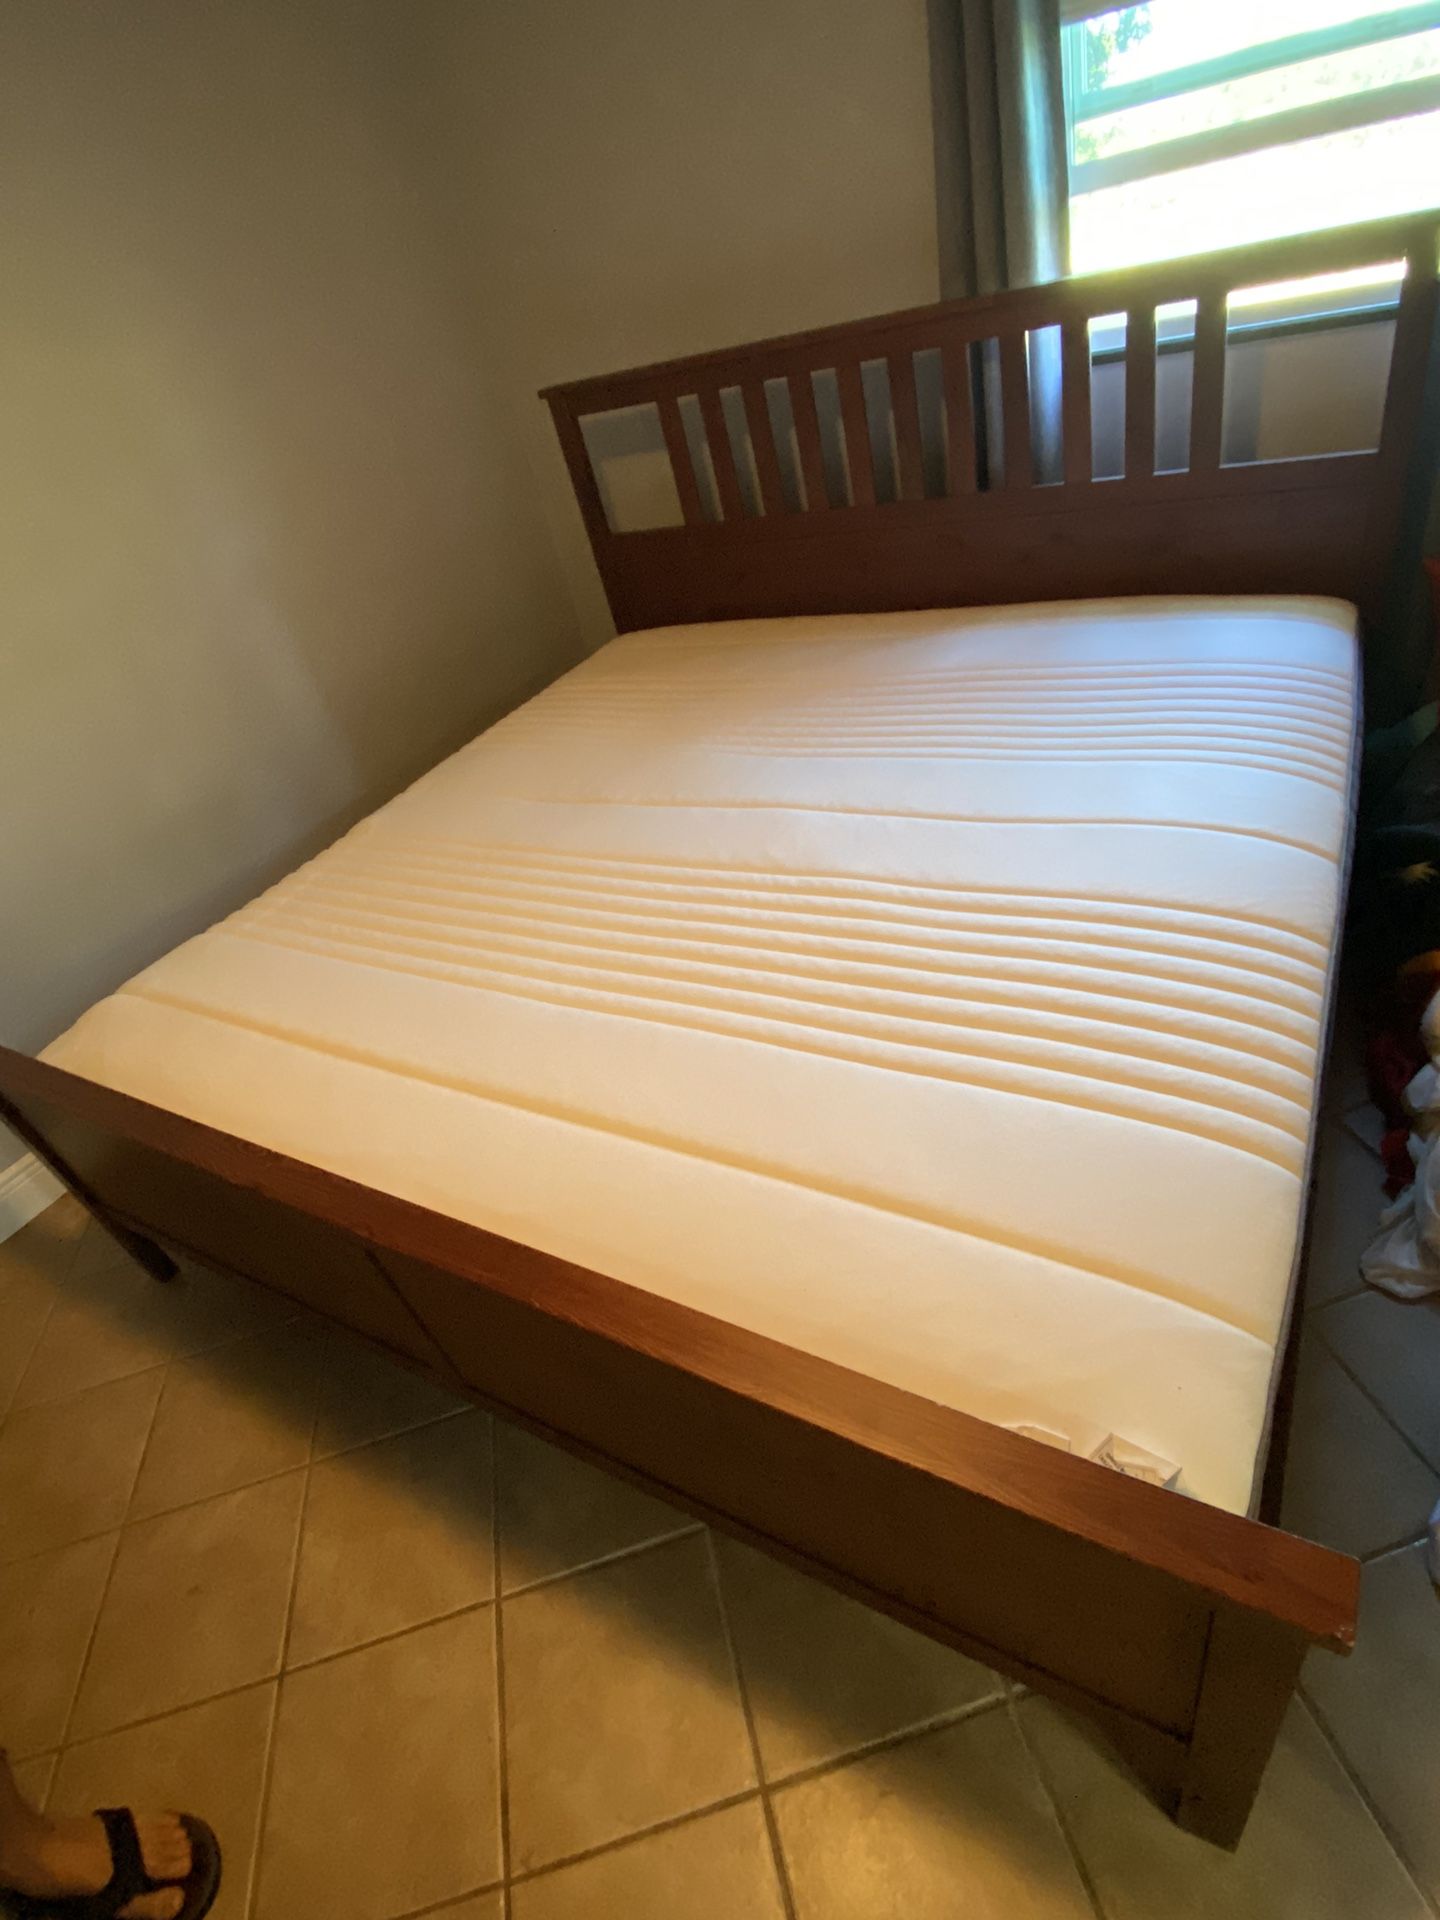 King Bed (mattress and Frame)